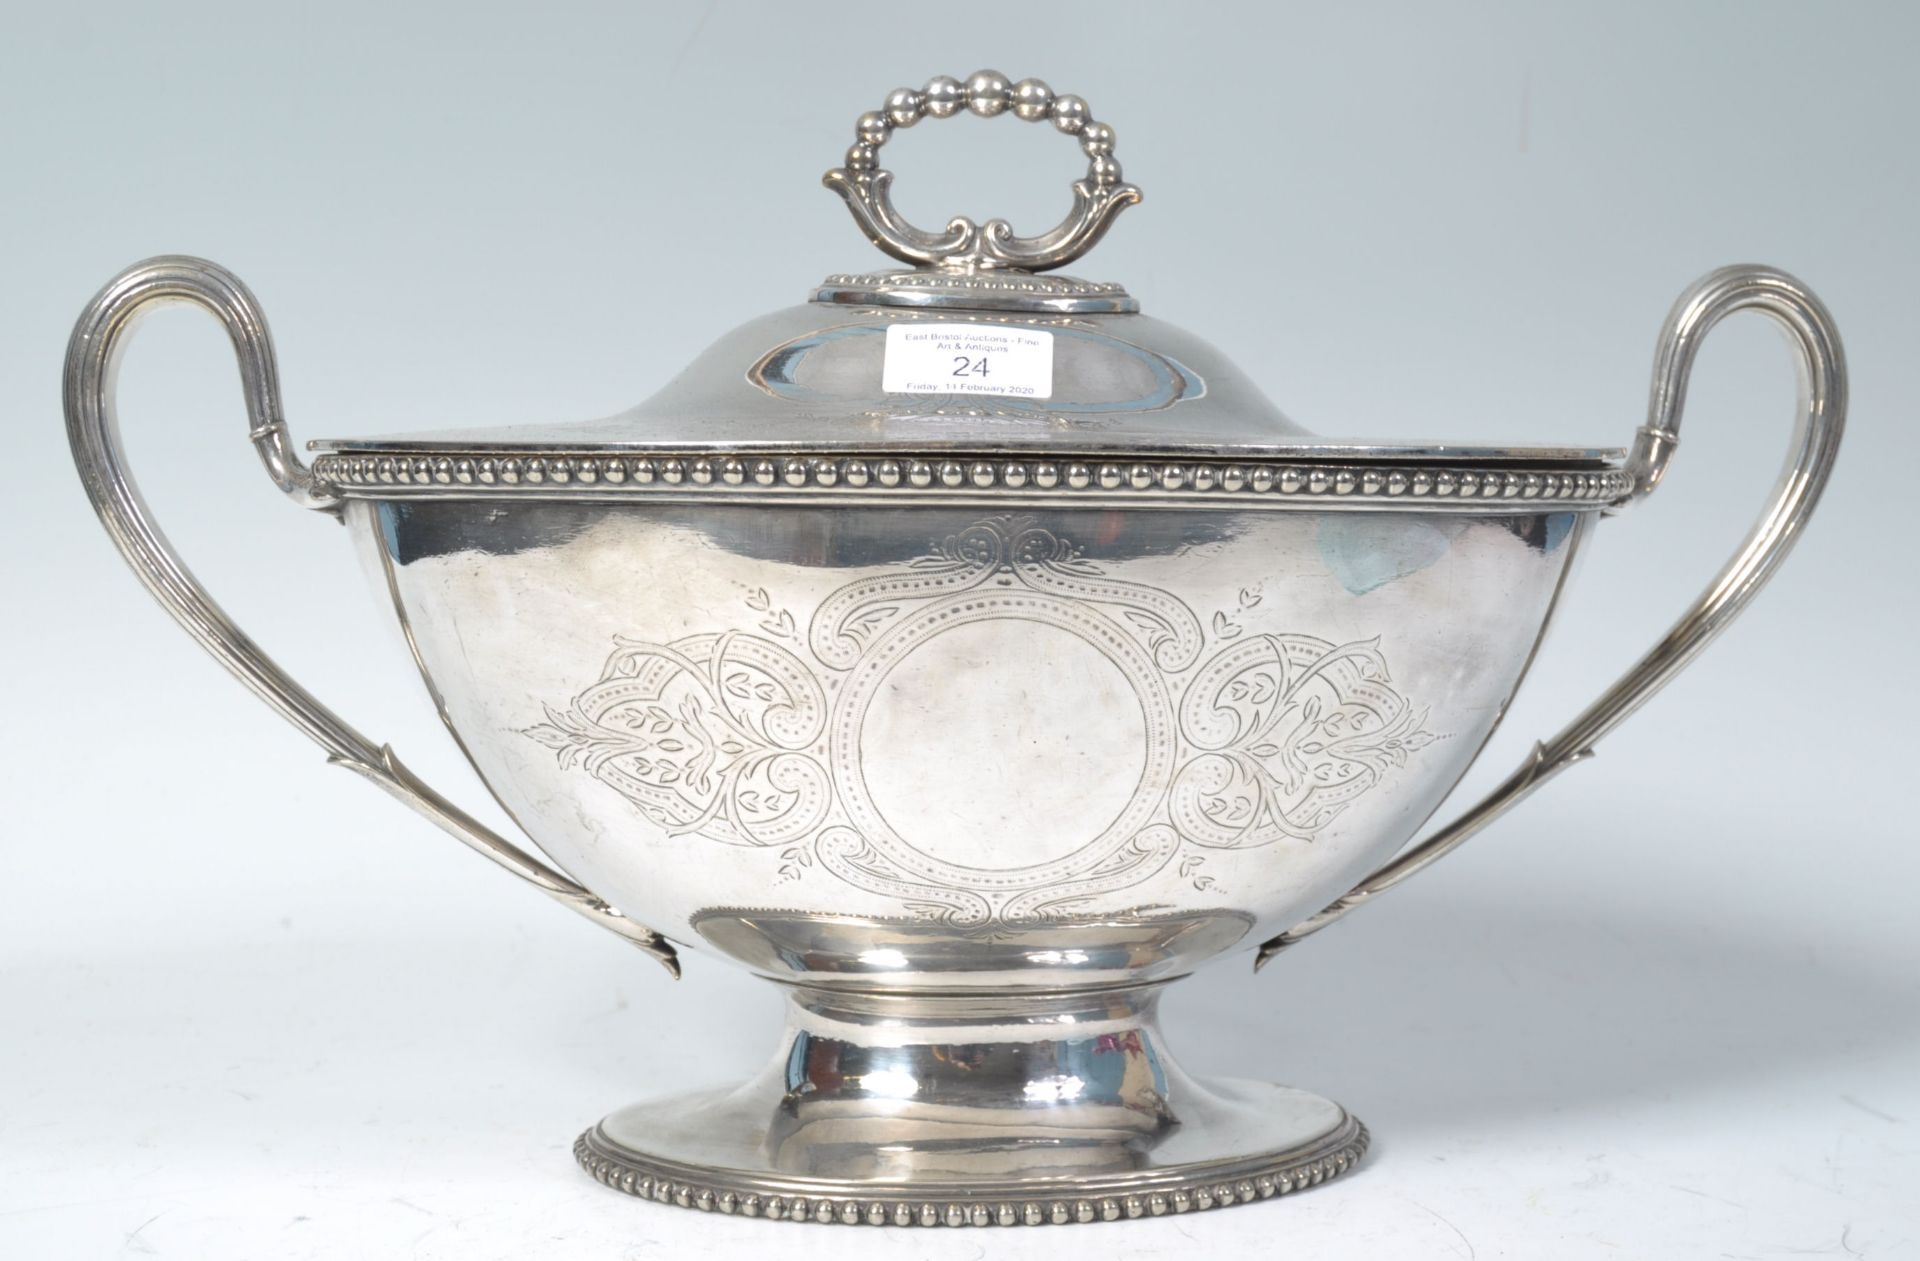 STUNNING 19TH CENTURY SILVER PLATED LARGE TUREEN